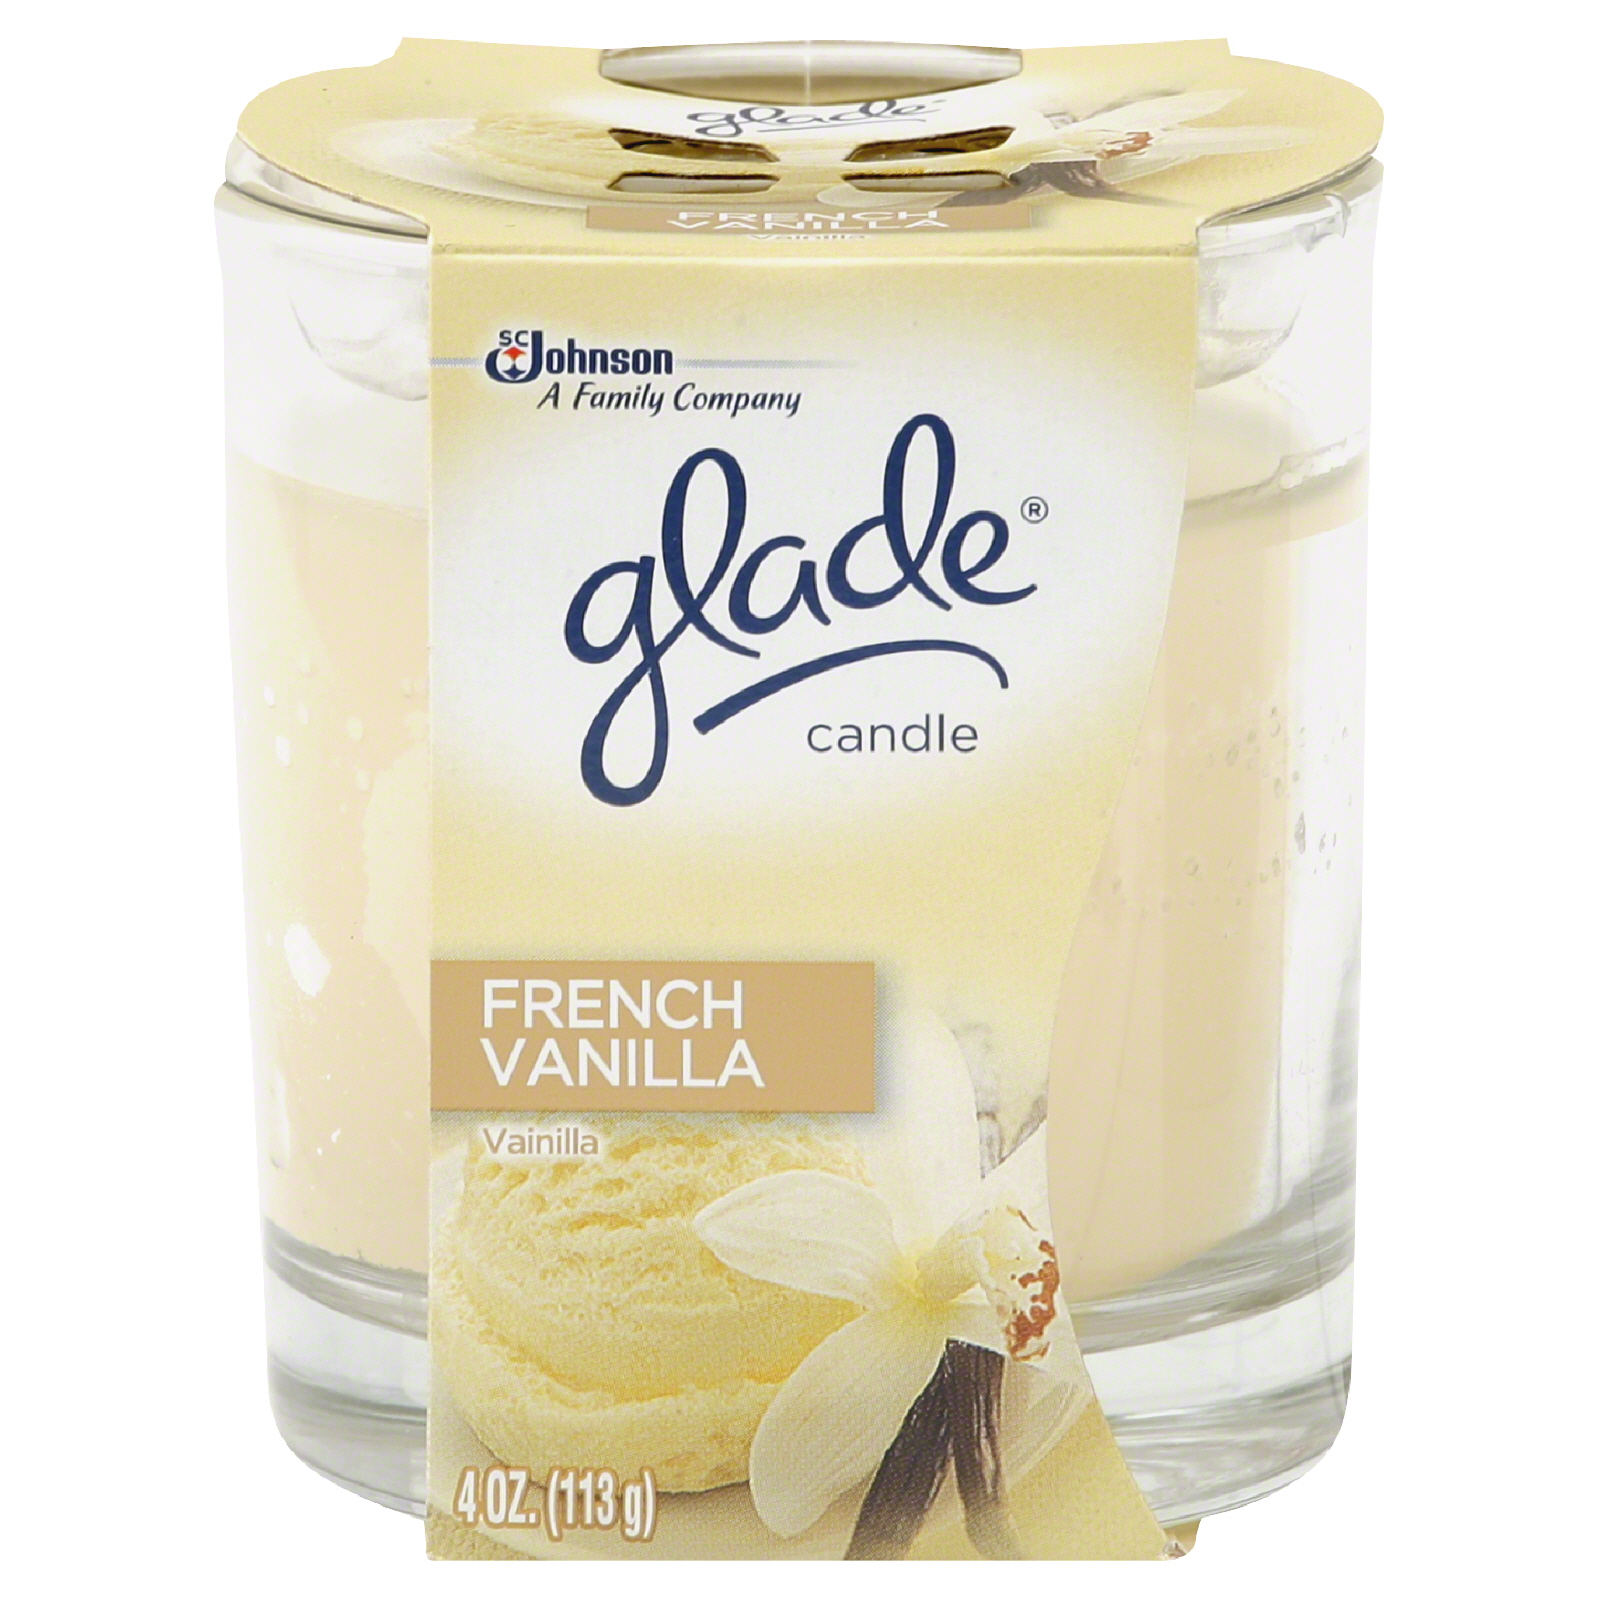 Glade Candle, French Vanilla, 1 candle [4 oz (113 g)]   Food & Grocery